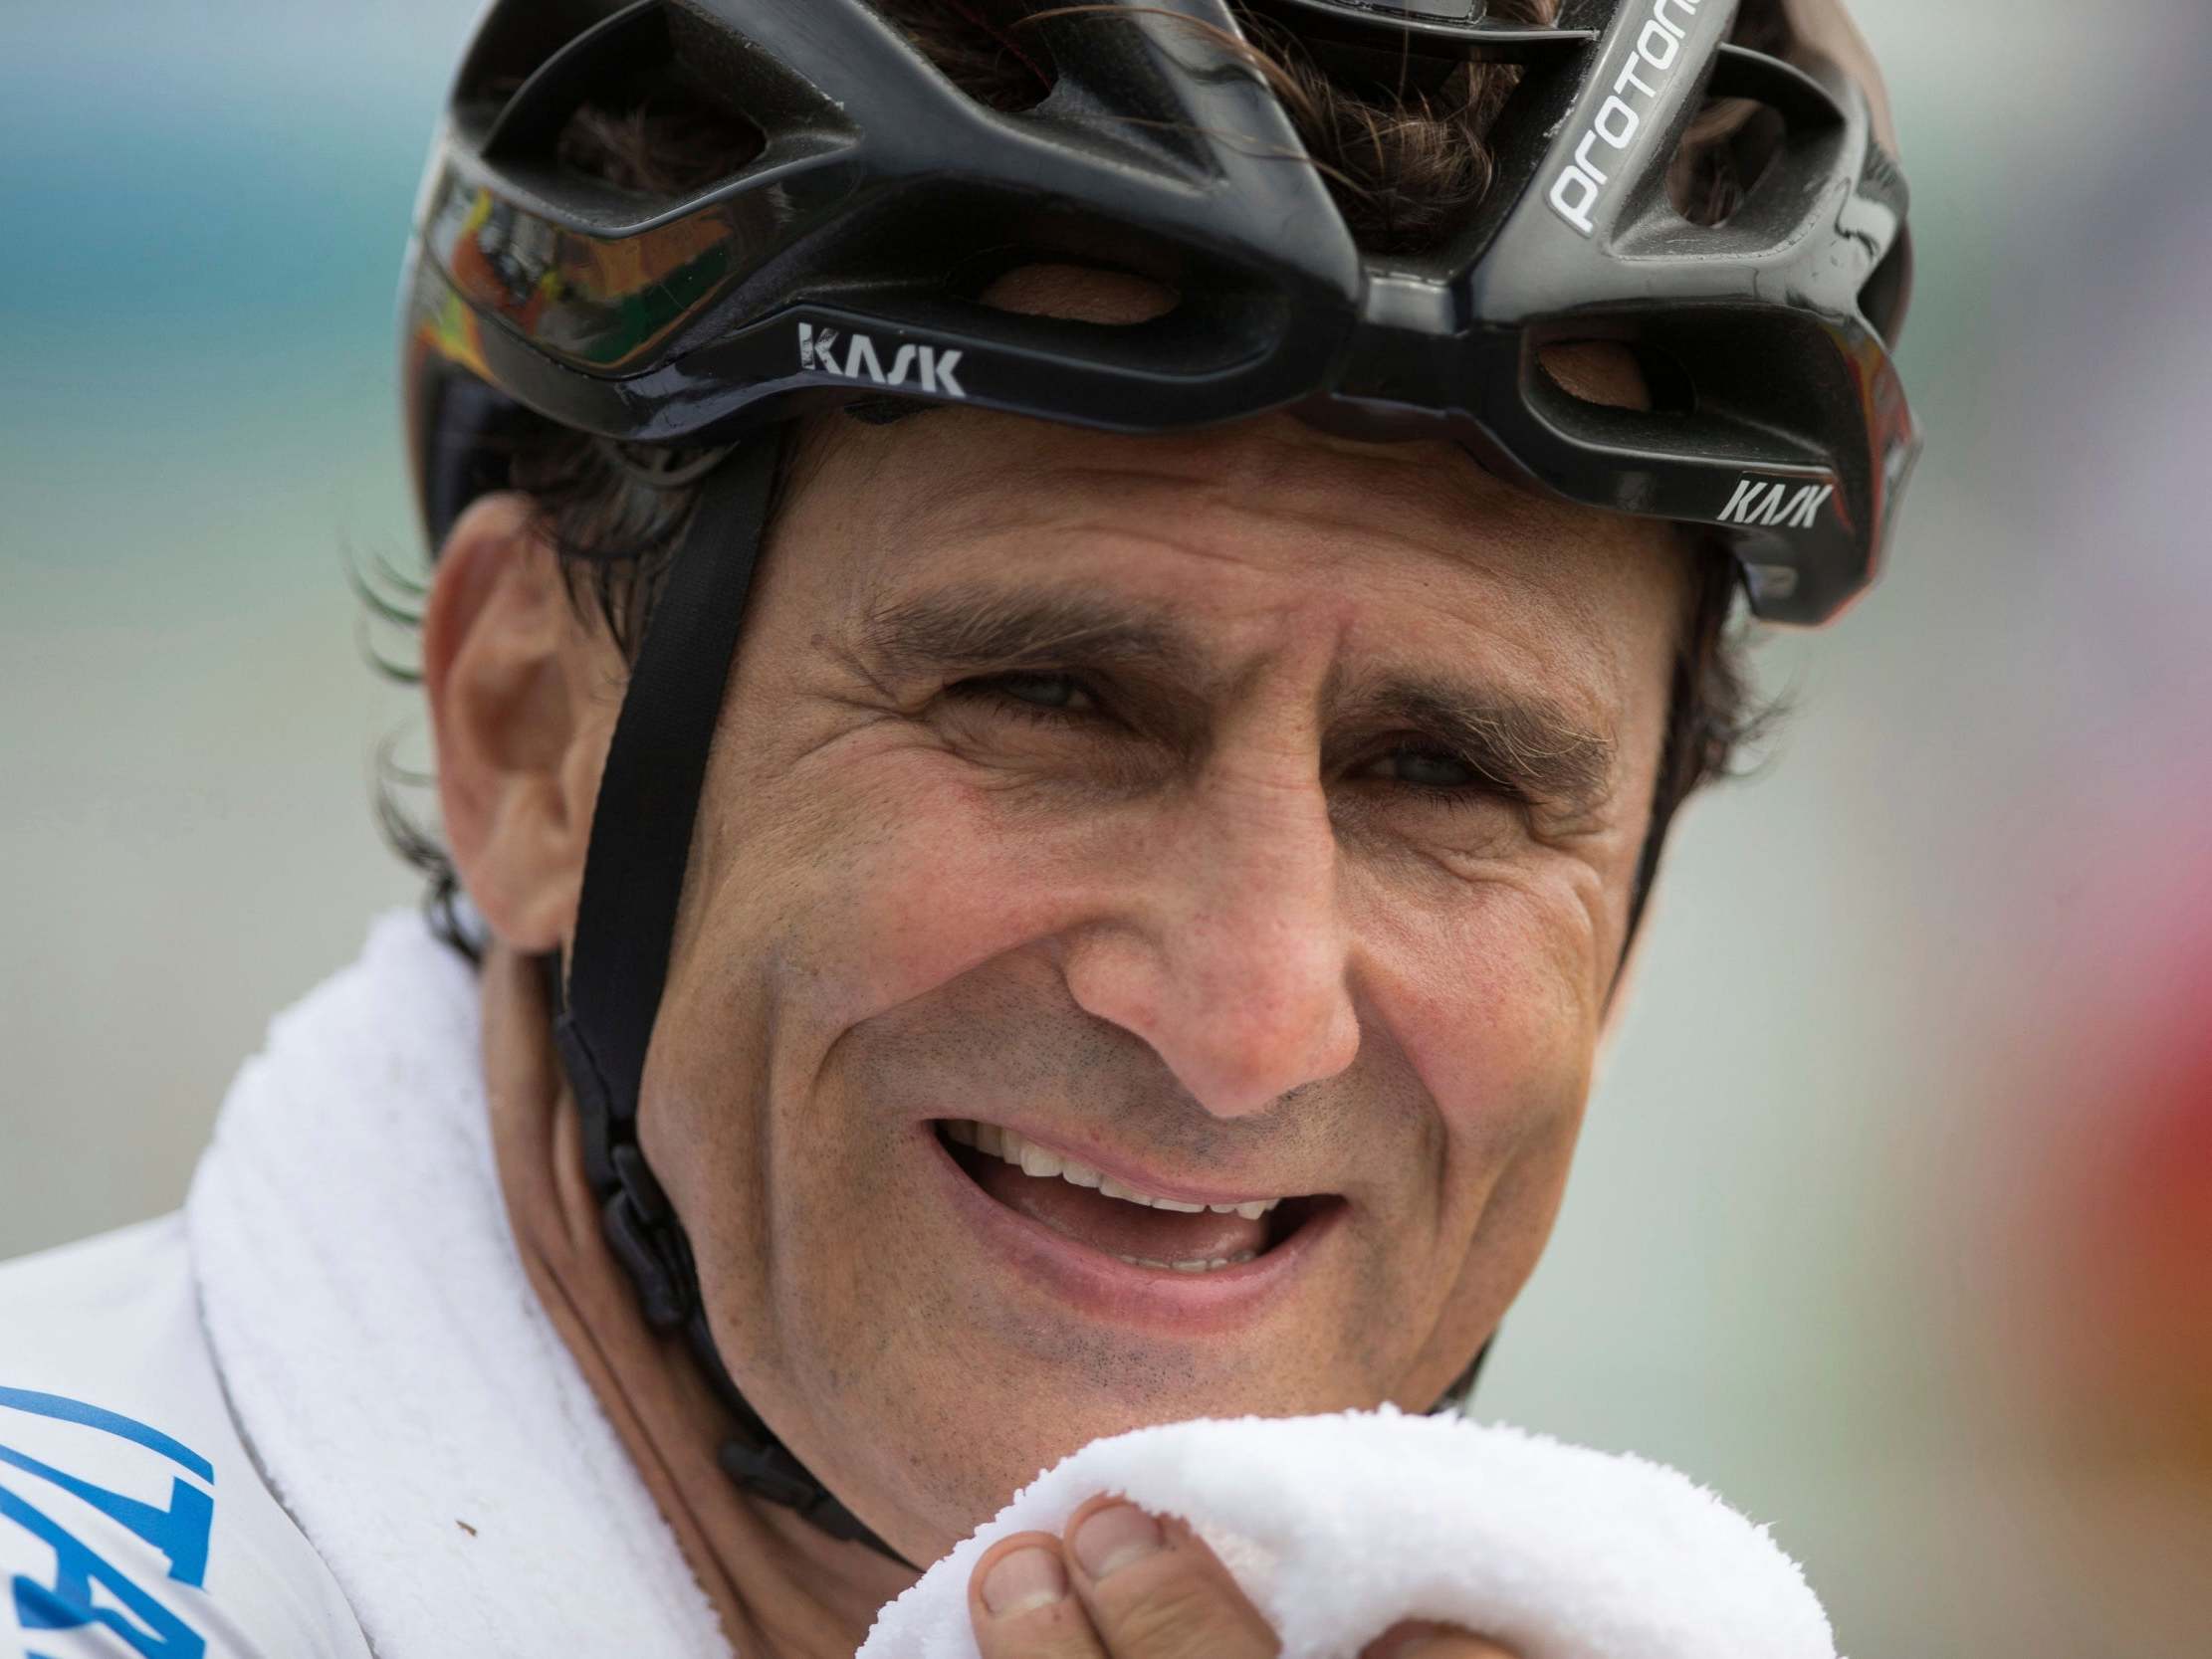 Alex Zanardi has been taken to hospital after a serious accident in Italy